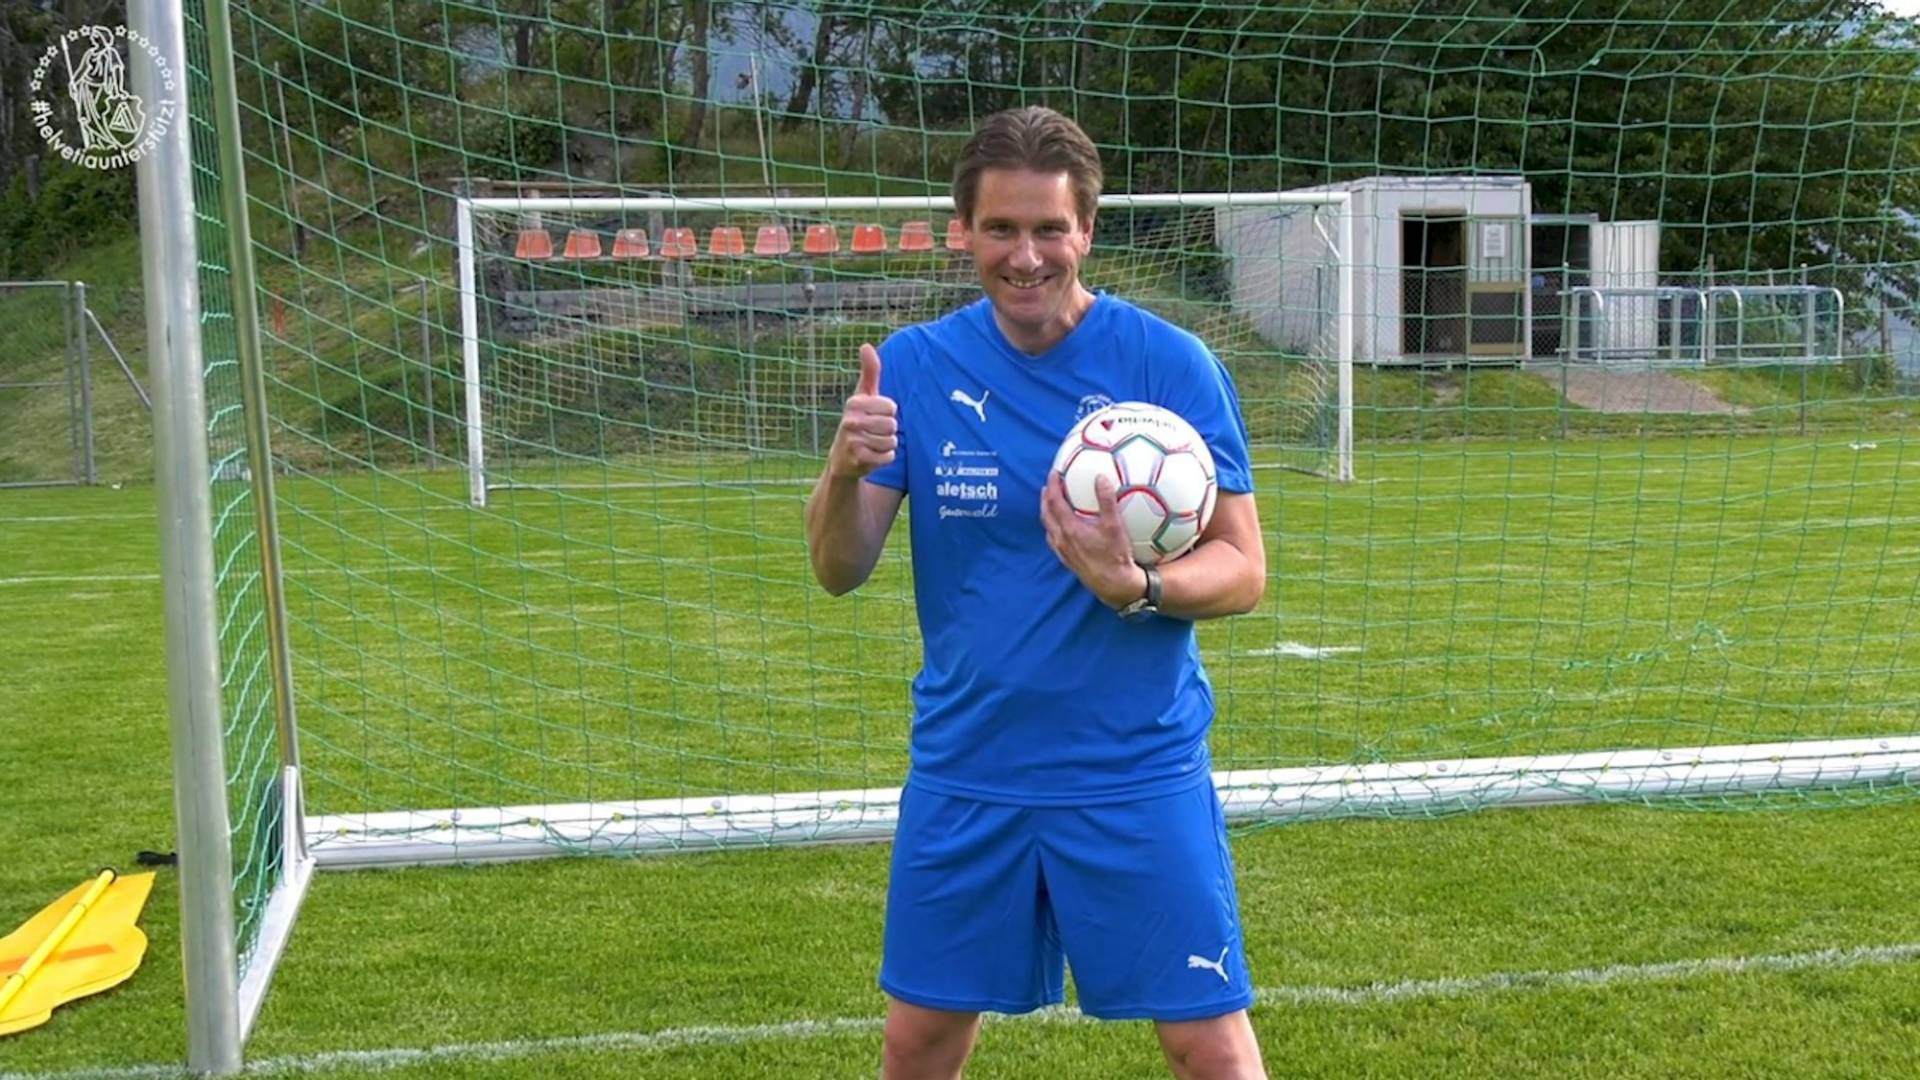 A man smiles and gives a thumbs up in front of the goal.